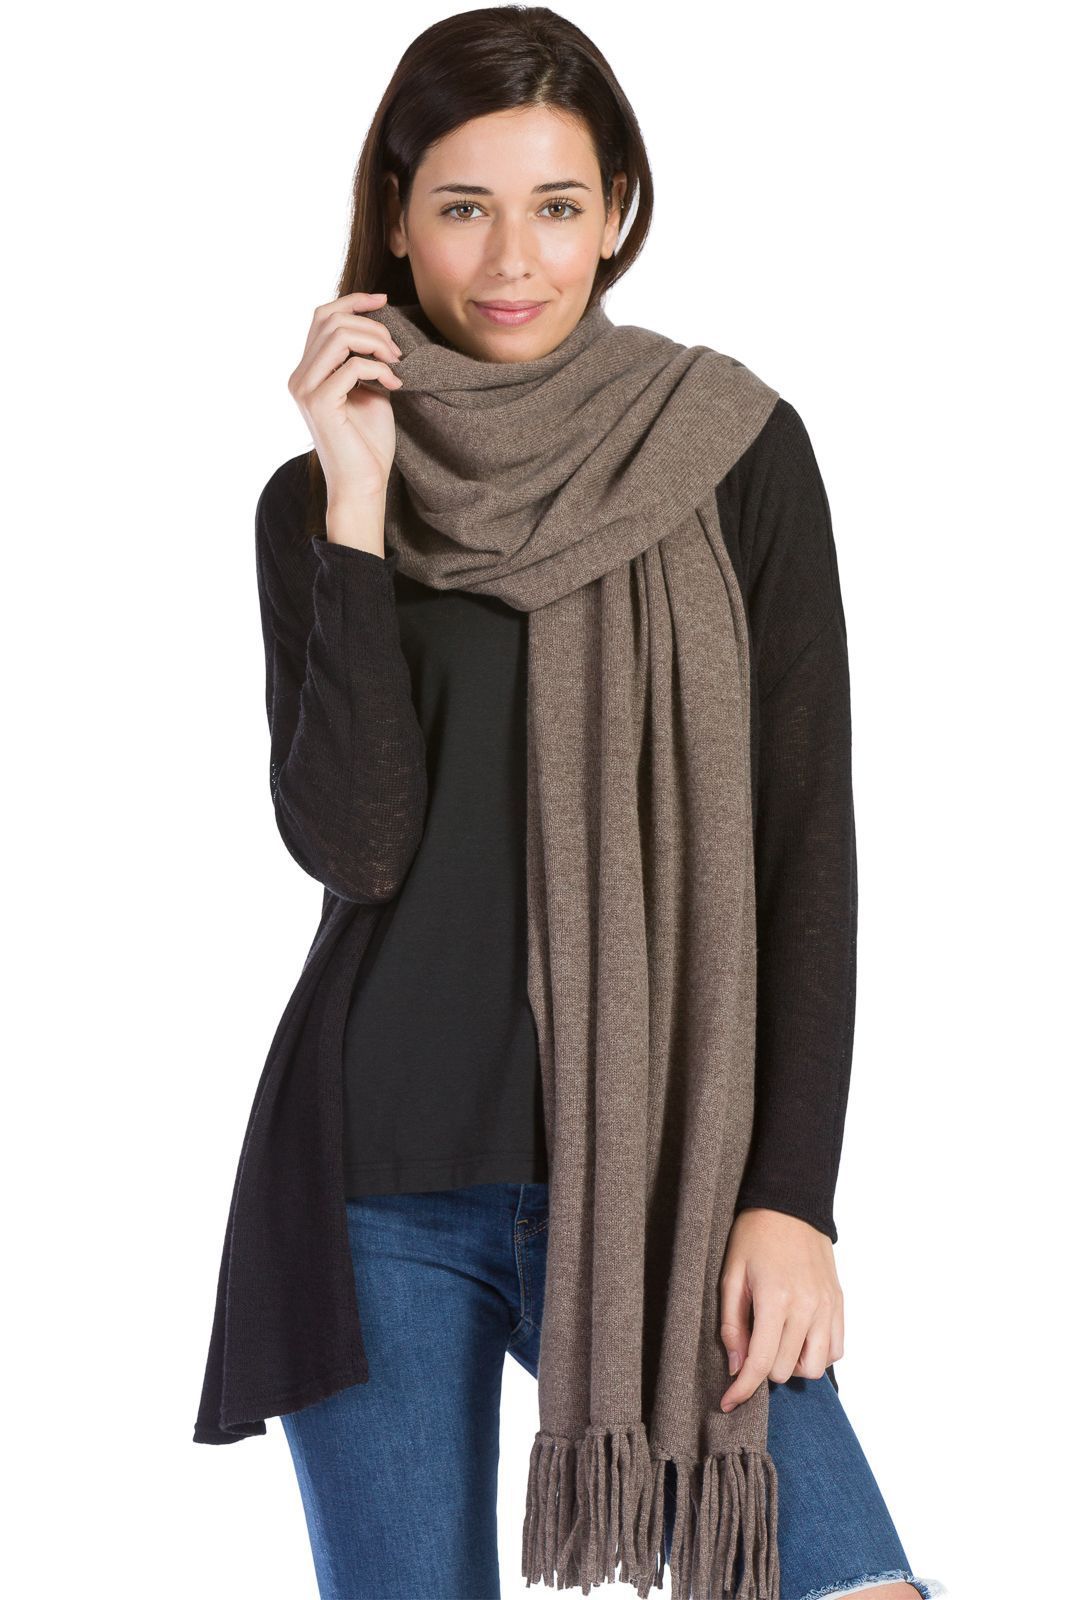 Women's 100% Pure Cashmere Knit Shawl Wrap with Fringe and Gift Box Womens>Accessories>Scarf Fishers Finery Cappuccino 